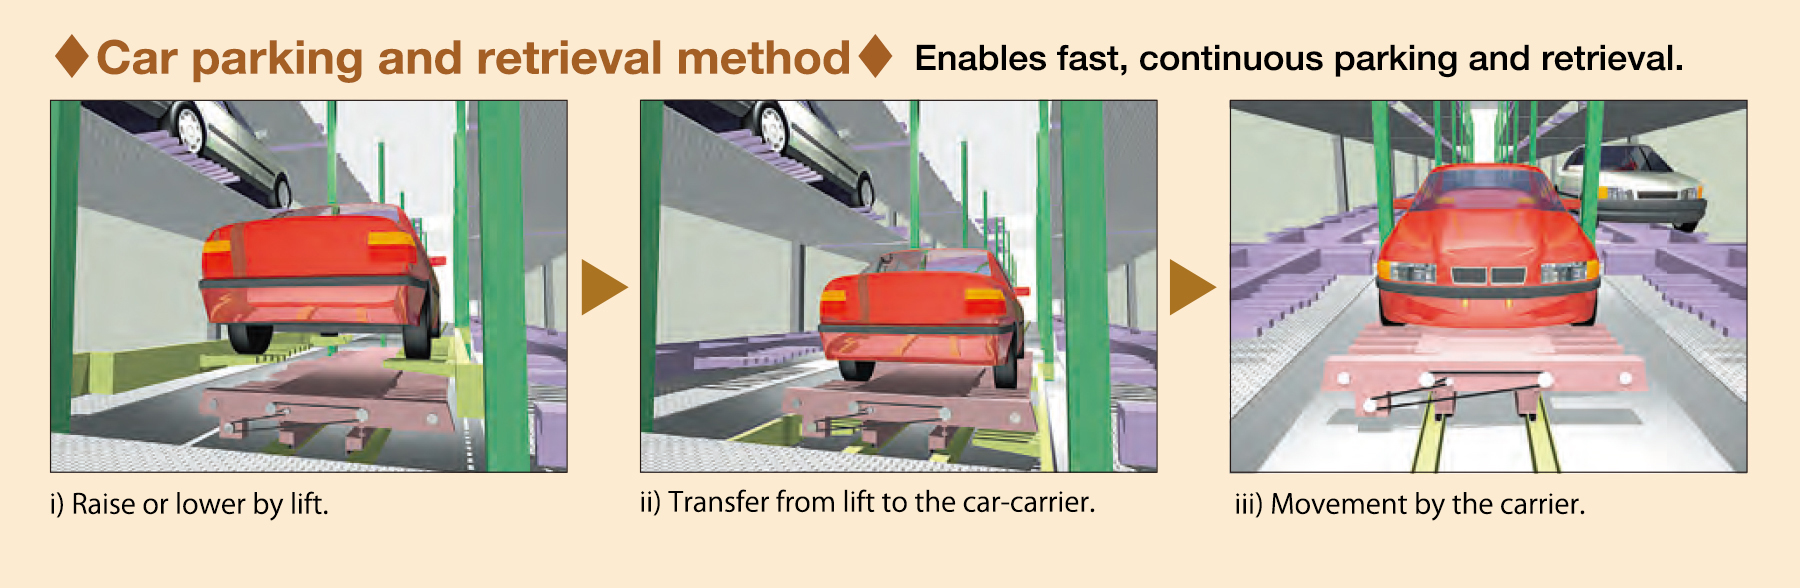 Car parking and retrieval method Enables fast, continuous parking and retrieval.